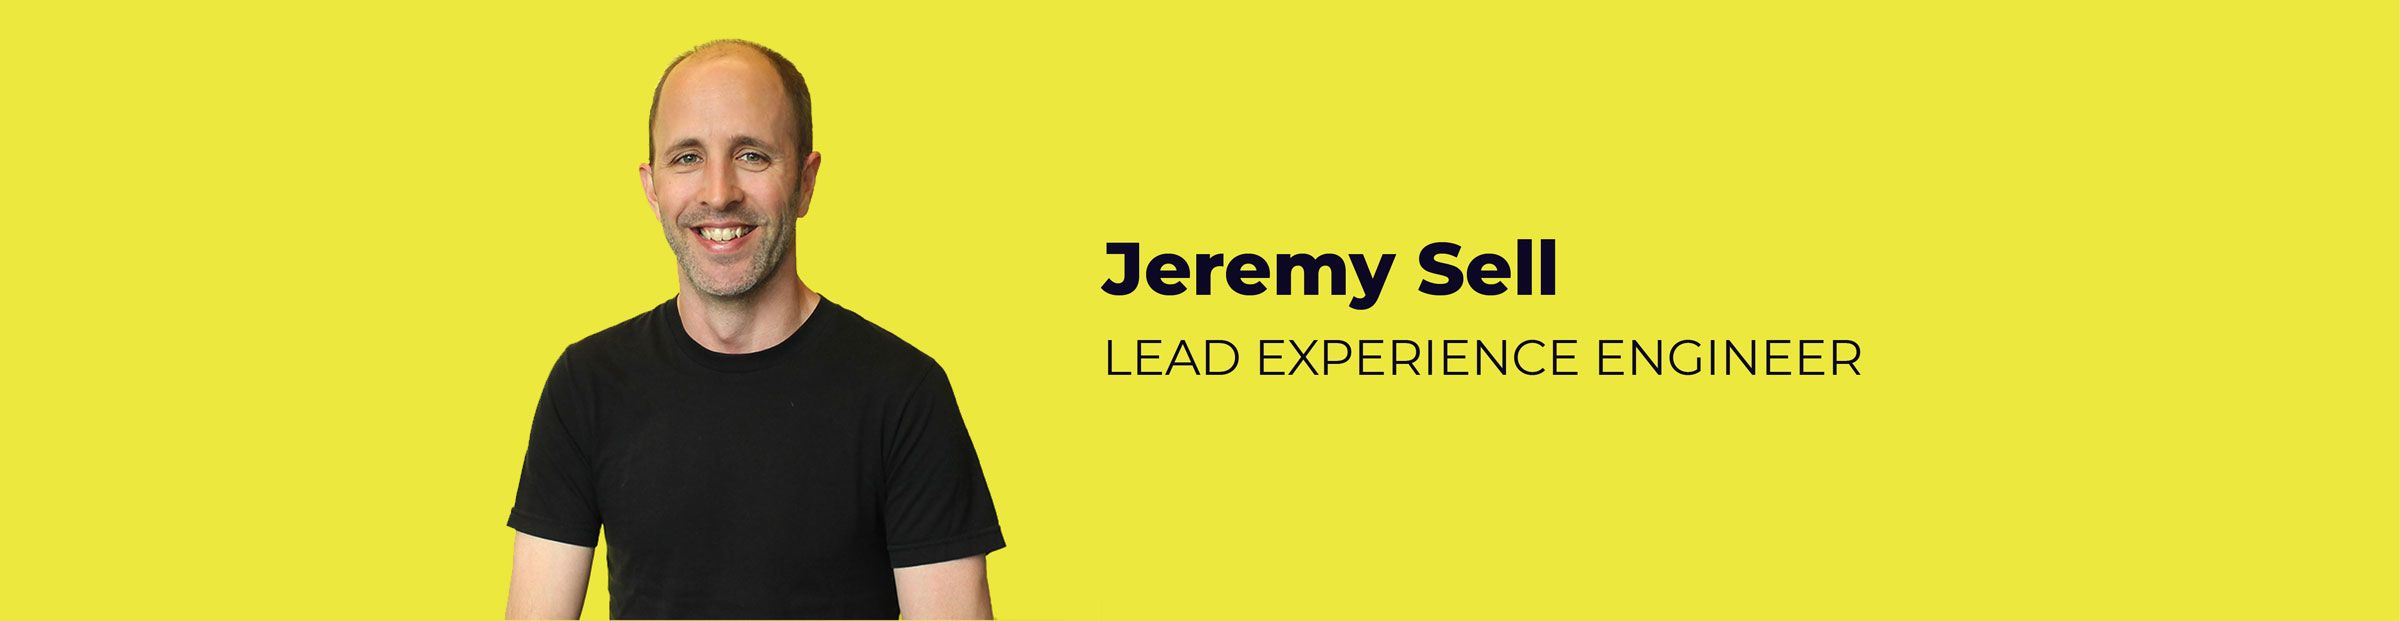 Jeremy Sell, Lead Experience Engineer